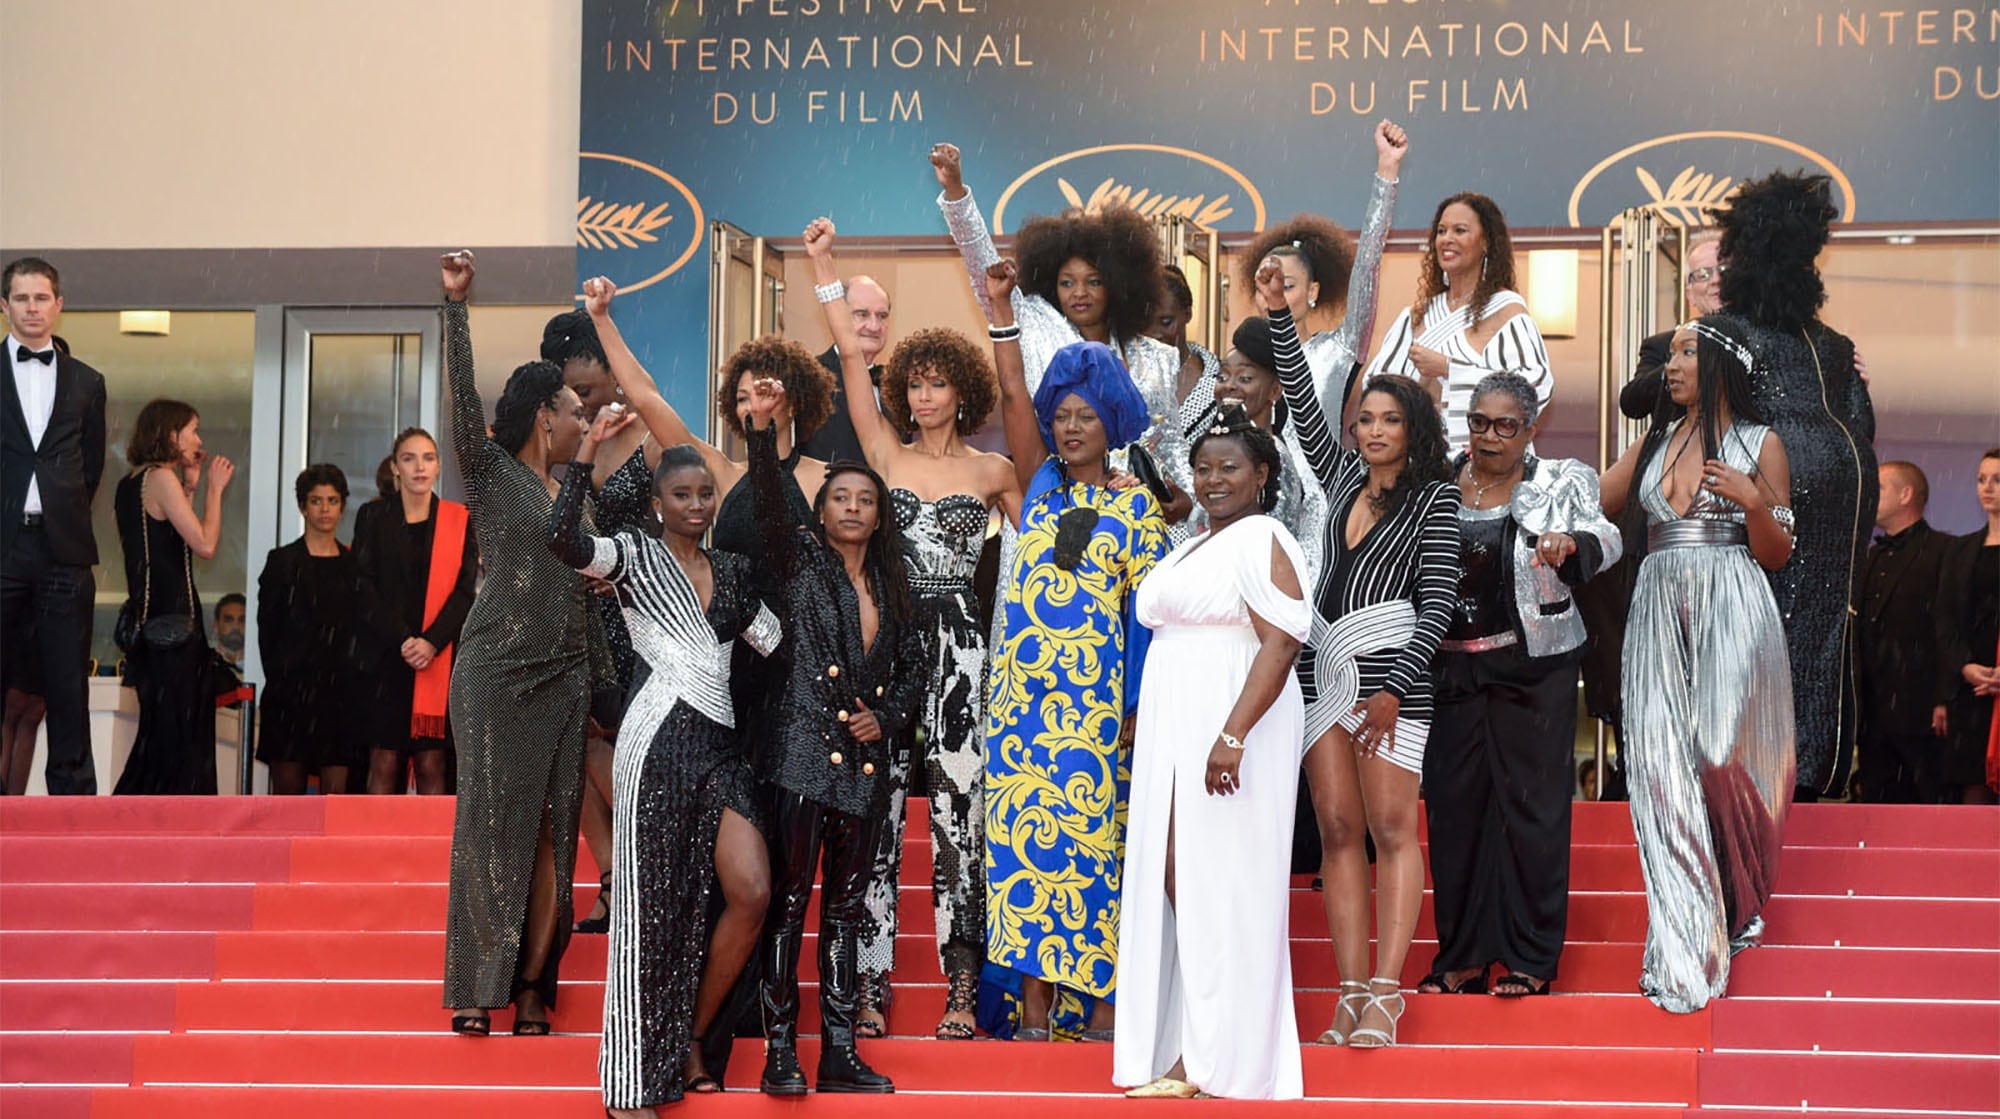 Last month might’ve seen the end of the Cannes Film Festival, waving goodbye to cinema’s A-listers as they tottered off into the distance, high heels in hand. But for the group of actresses who joined forces at the event to protest racism in the French film industry, the action has only just begun.